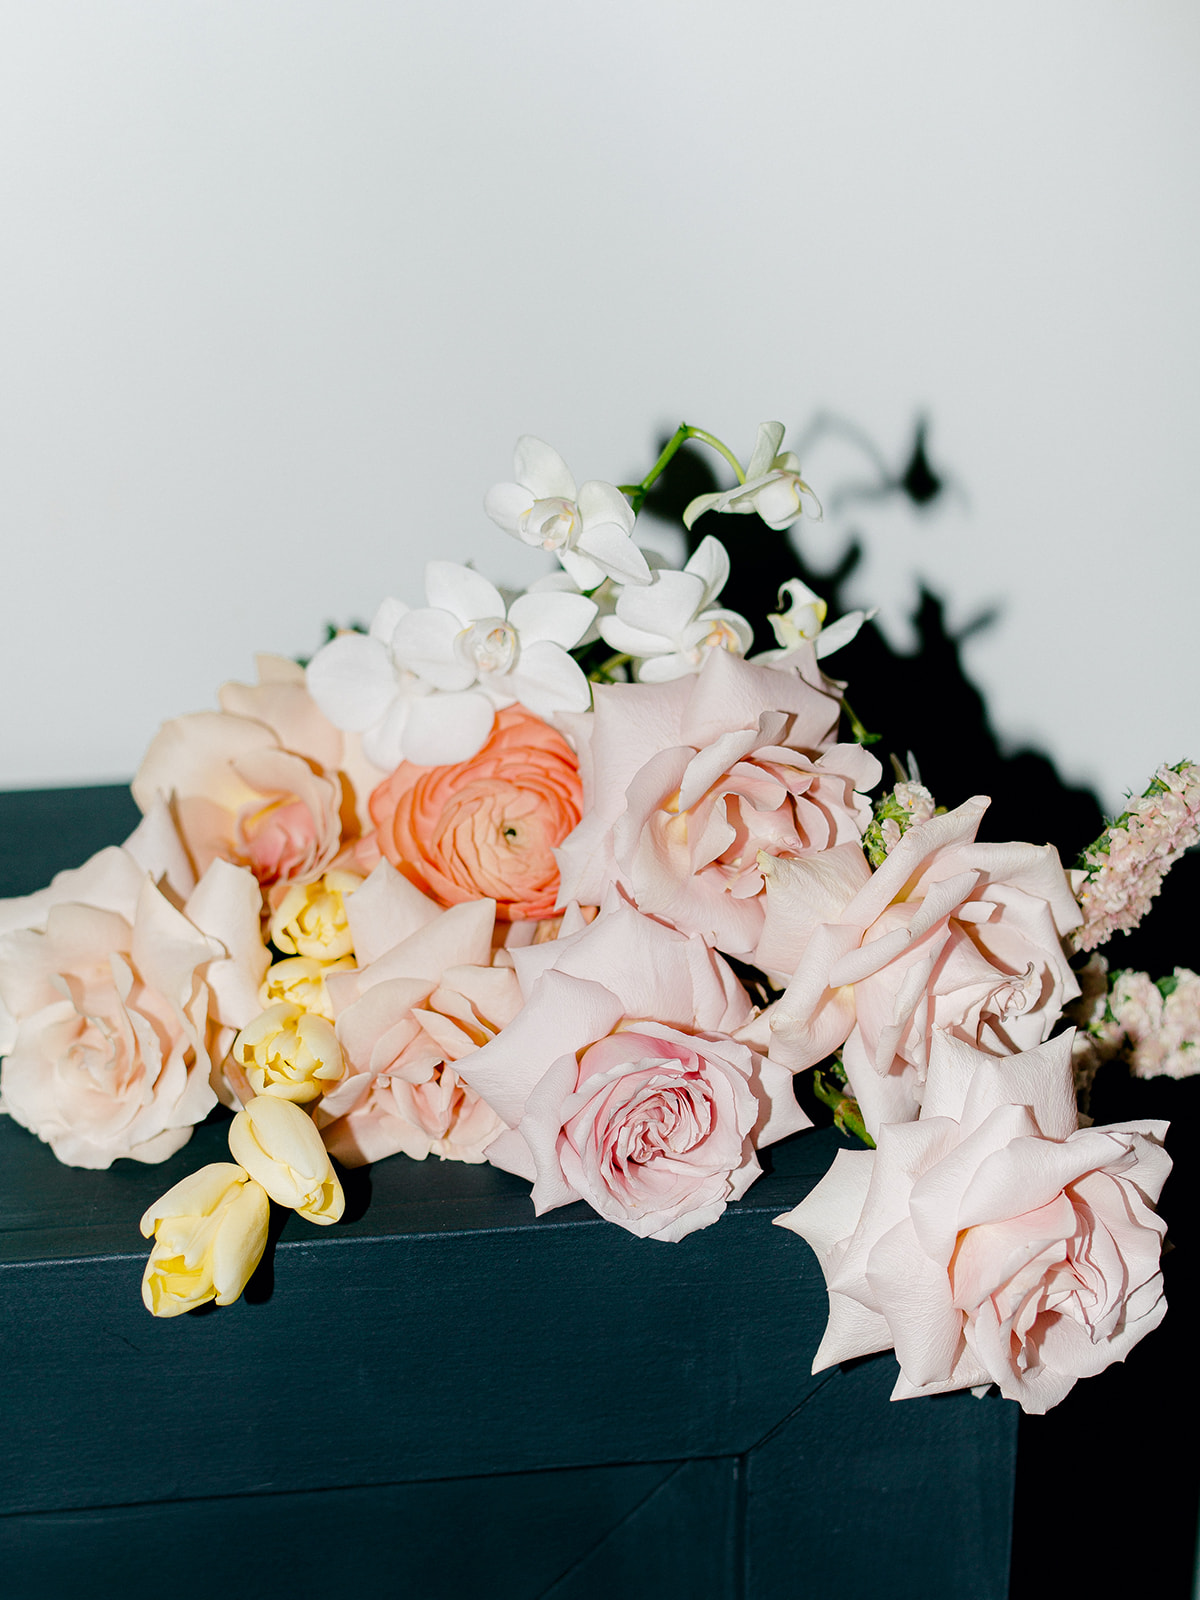 A feminine and romantic bouquet perfectly paired with modern and minimal studio aesthetics, creating an enchanting visual contrast, creating a captivating picture through the use of flash photography, showcasing the beauty and intricate details of the bride's bouquet